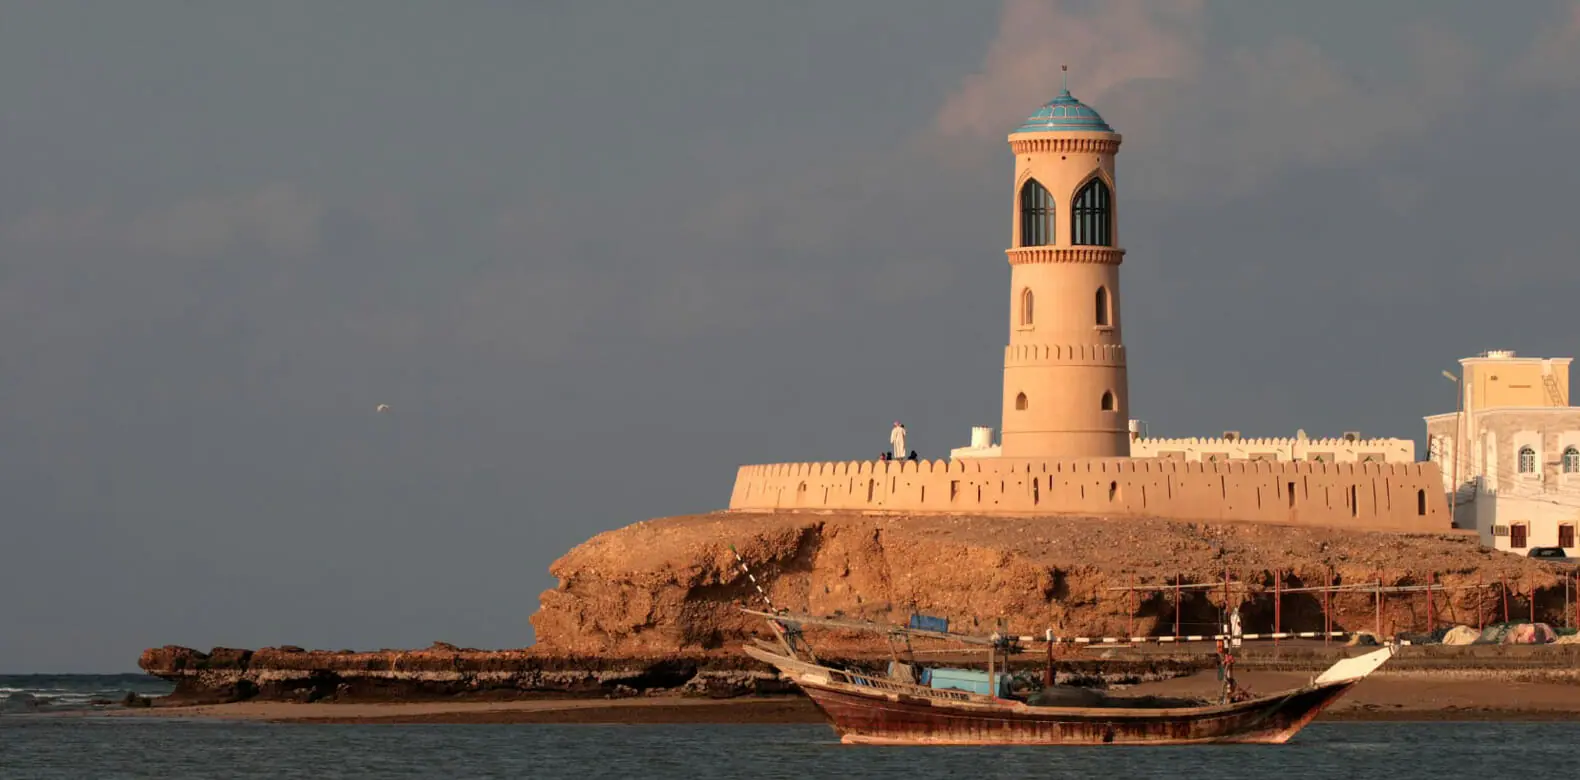 A lighthouse in Sur near the Chedi Muscat